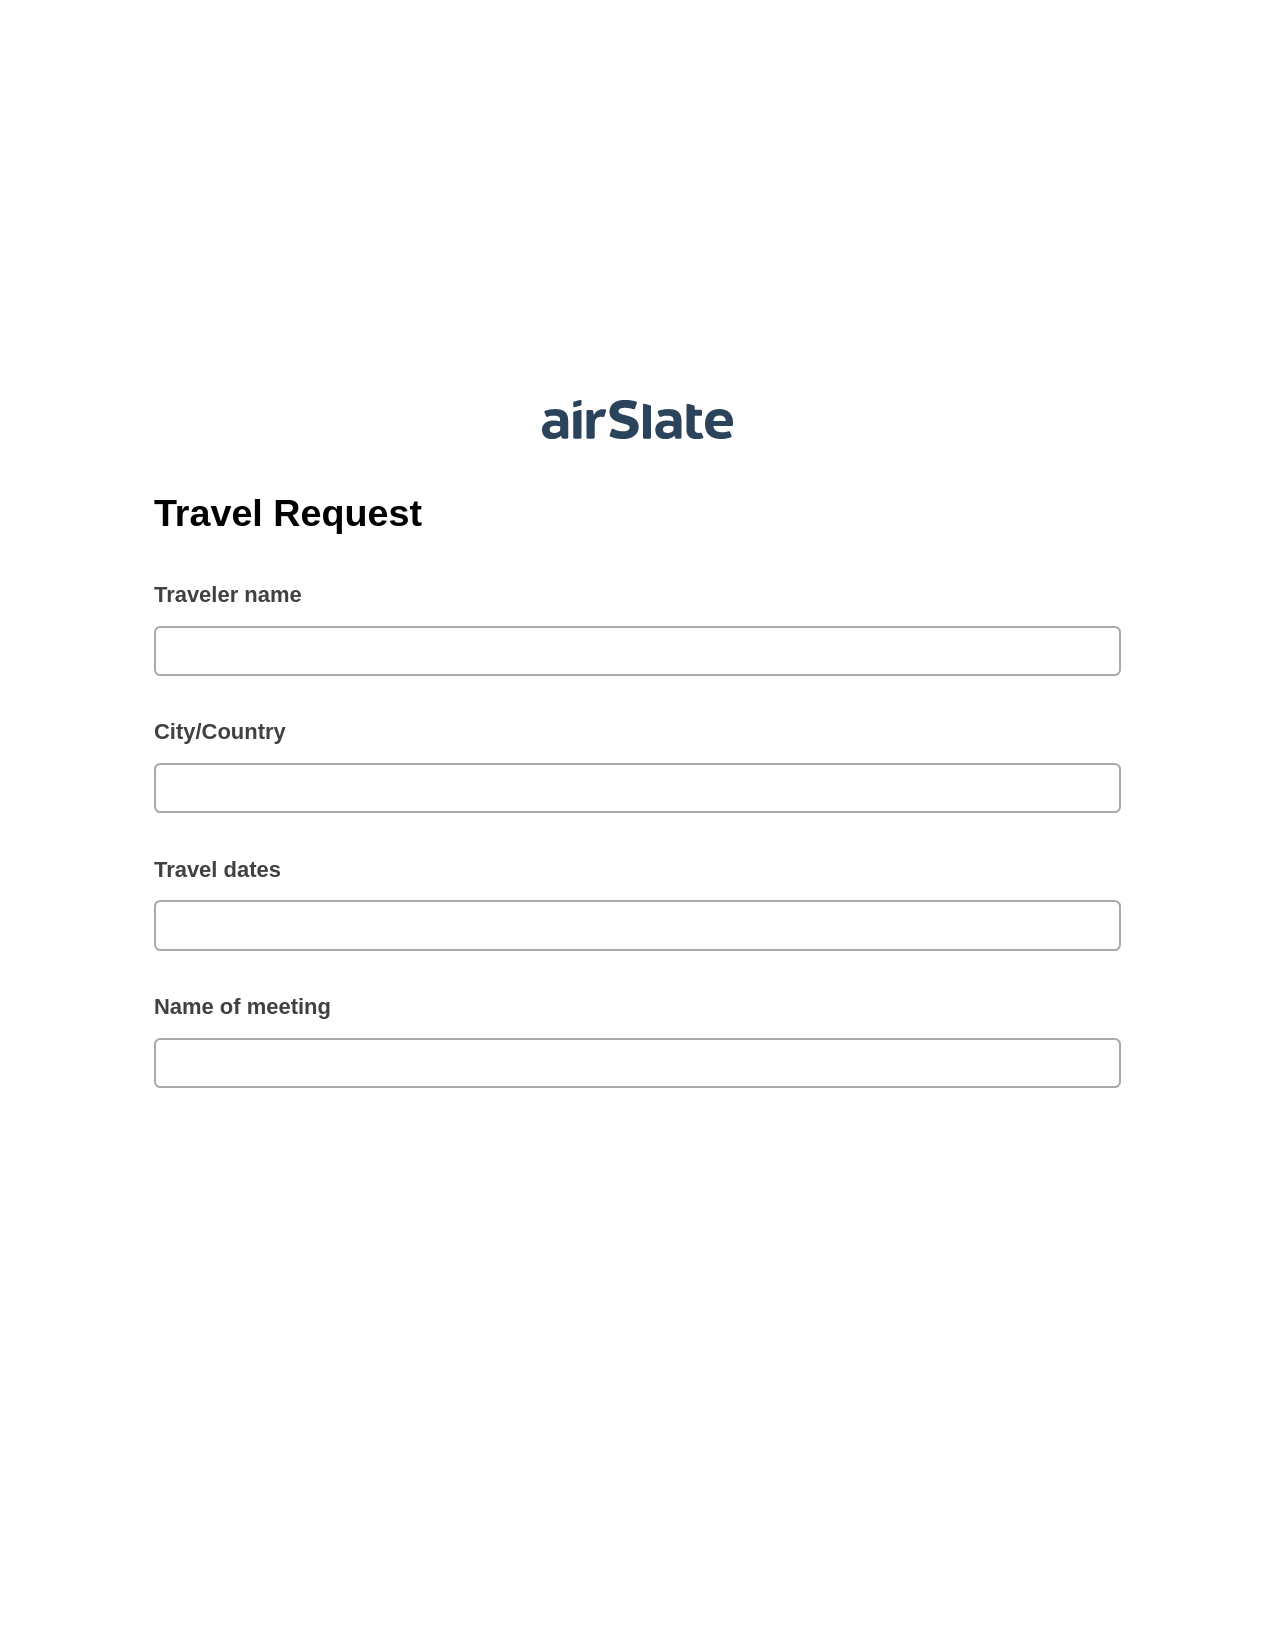 Travel Request Pre-fill Document Bot, Create NetSuite Records Bot, Export to Excel 365 Bot